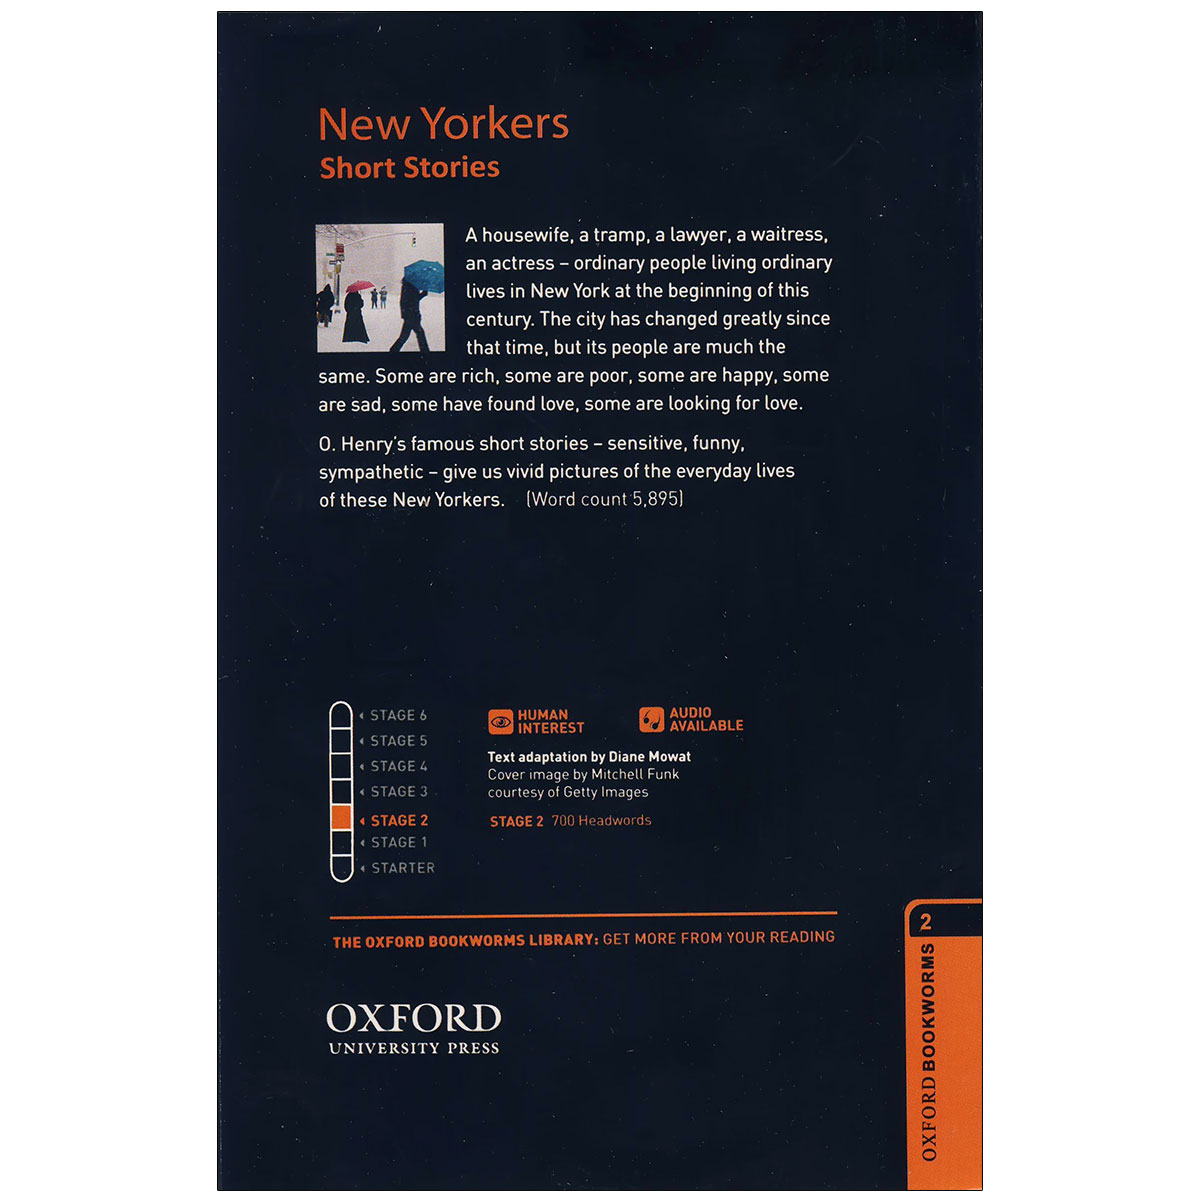 New-Yorkers-back